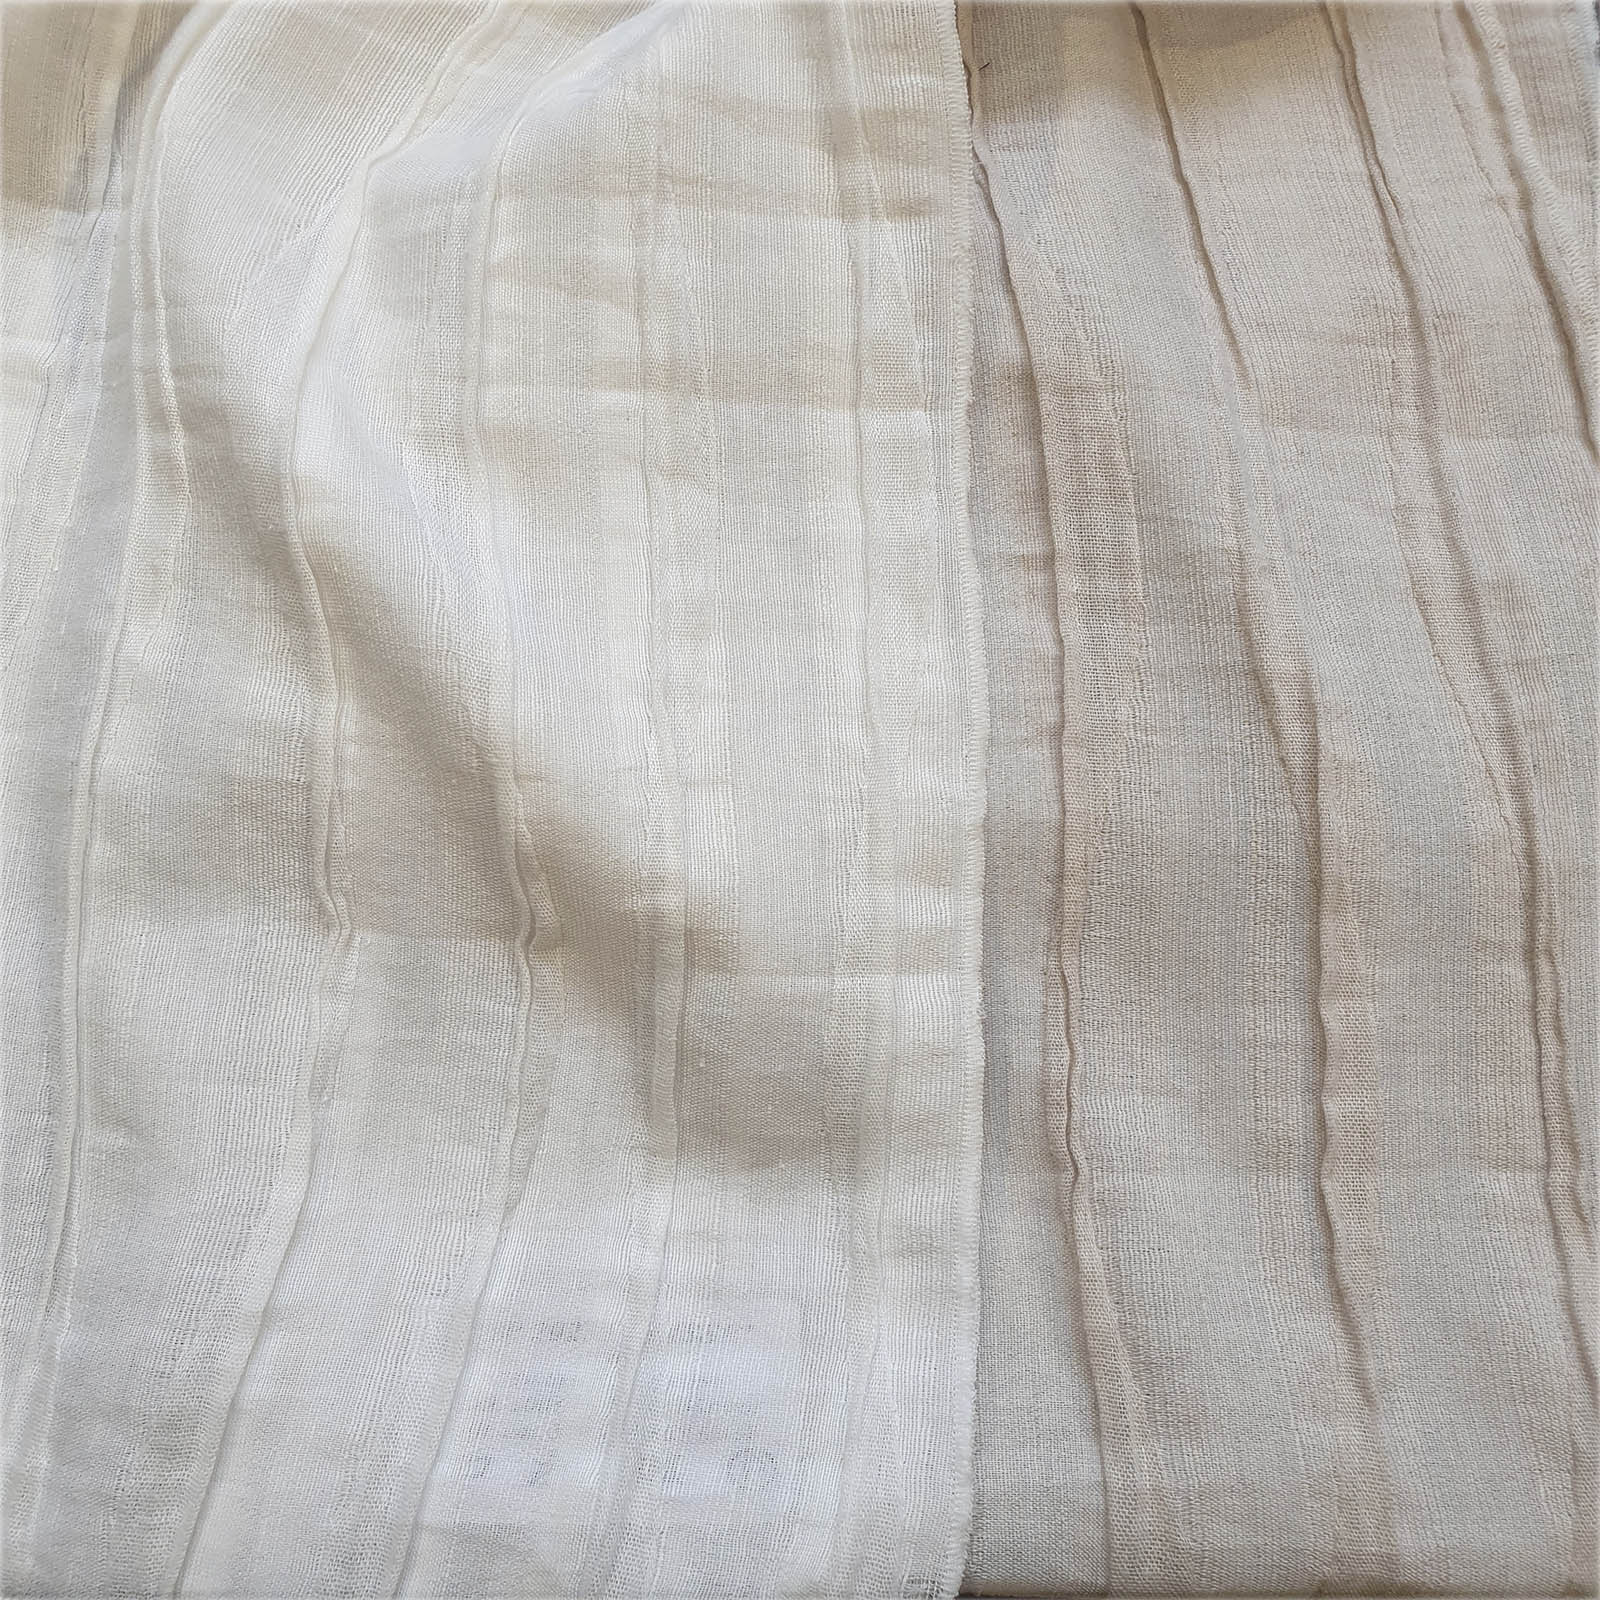 GP20265 PLISSE' AIRON 60%PL 40%LIN W. 320CM
Linen blend jacquard 3d plisseè with sewing wffect.<br /> 100% Made in Italy fabric. Style modern and trendy with plain, jacquard structures, small drawings and stripes decorations.

 Treatments: antibacterial, embossing 3D effect and soft hand. Type of workings: jacquard and pleated. 